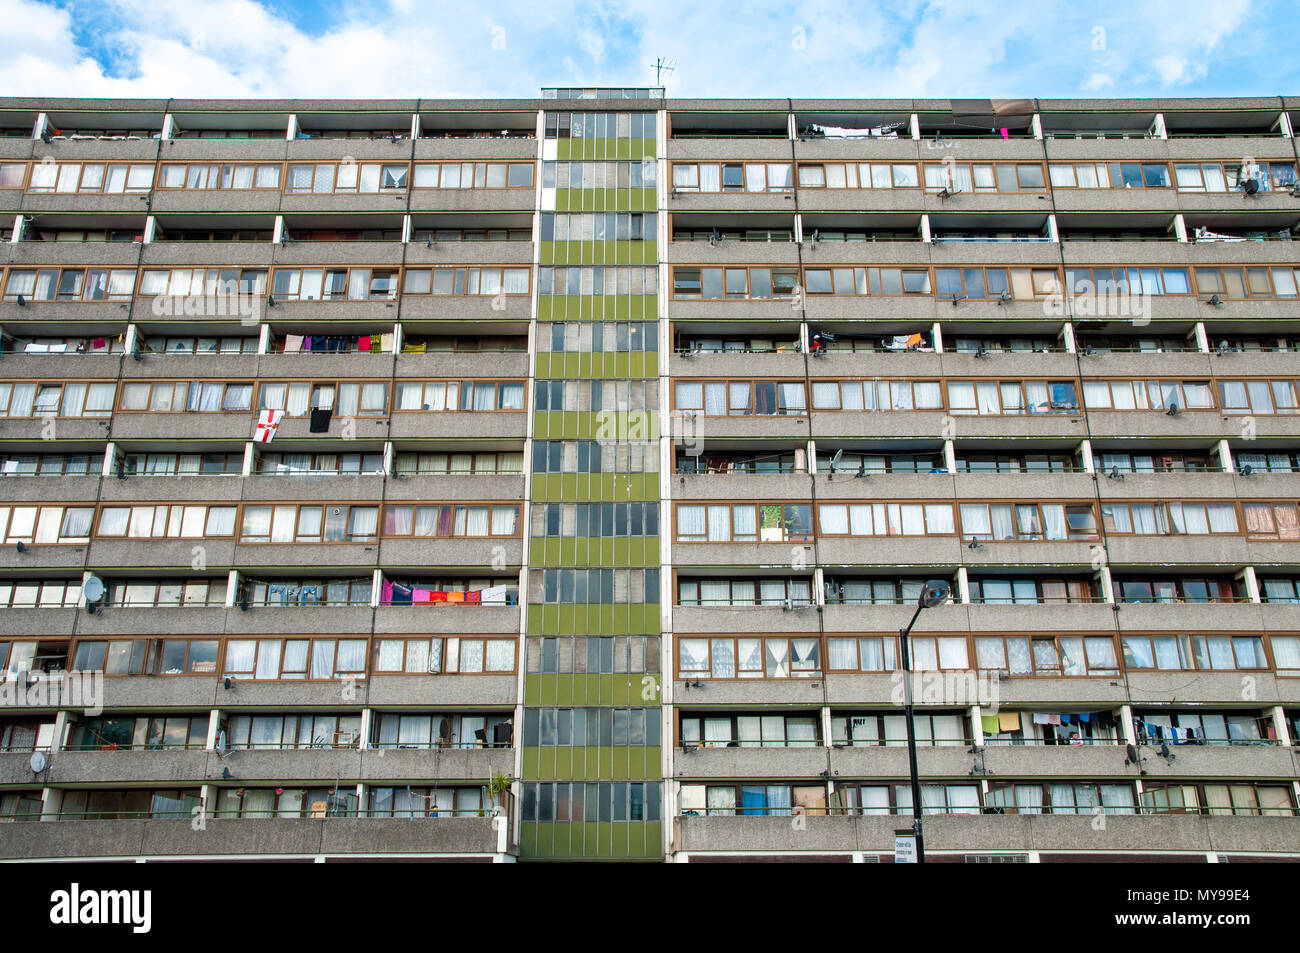 Council flats in South London, UK Stock Photo